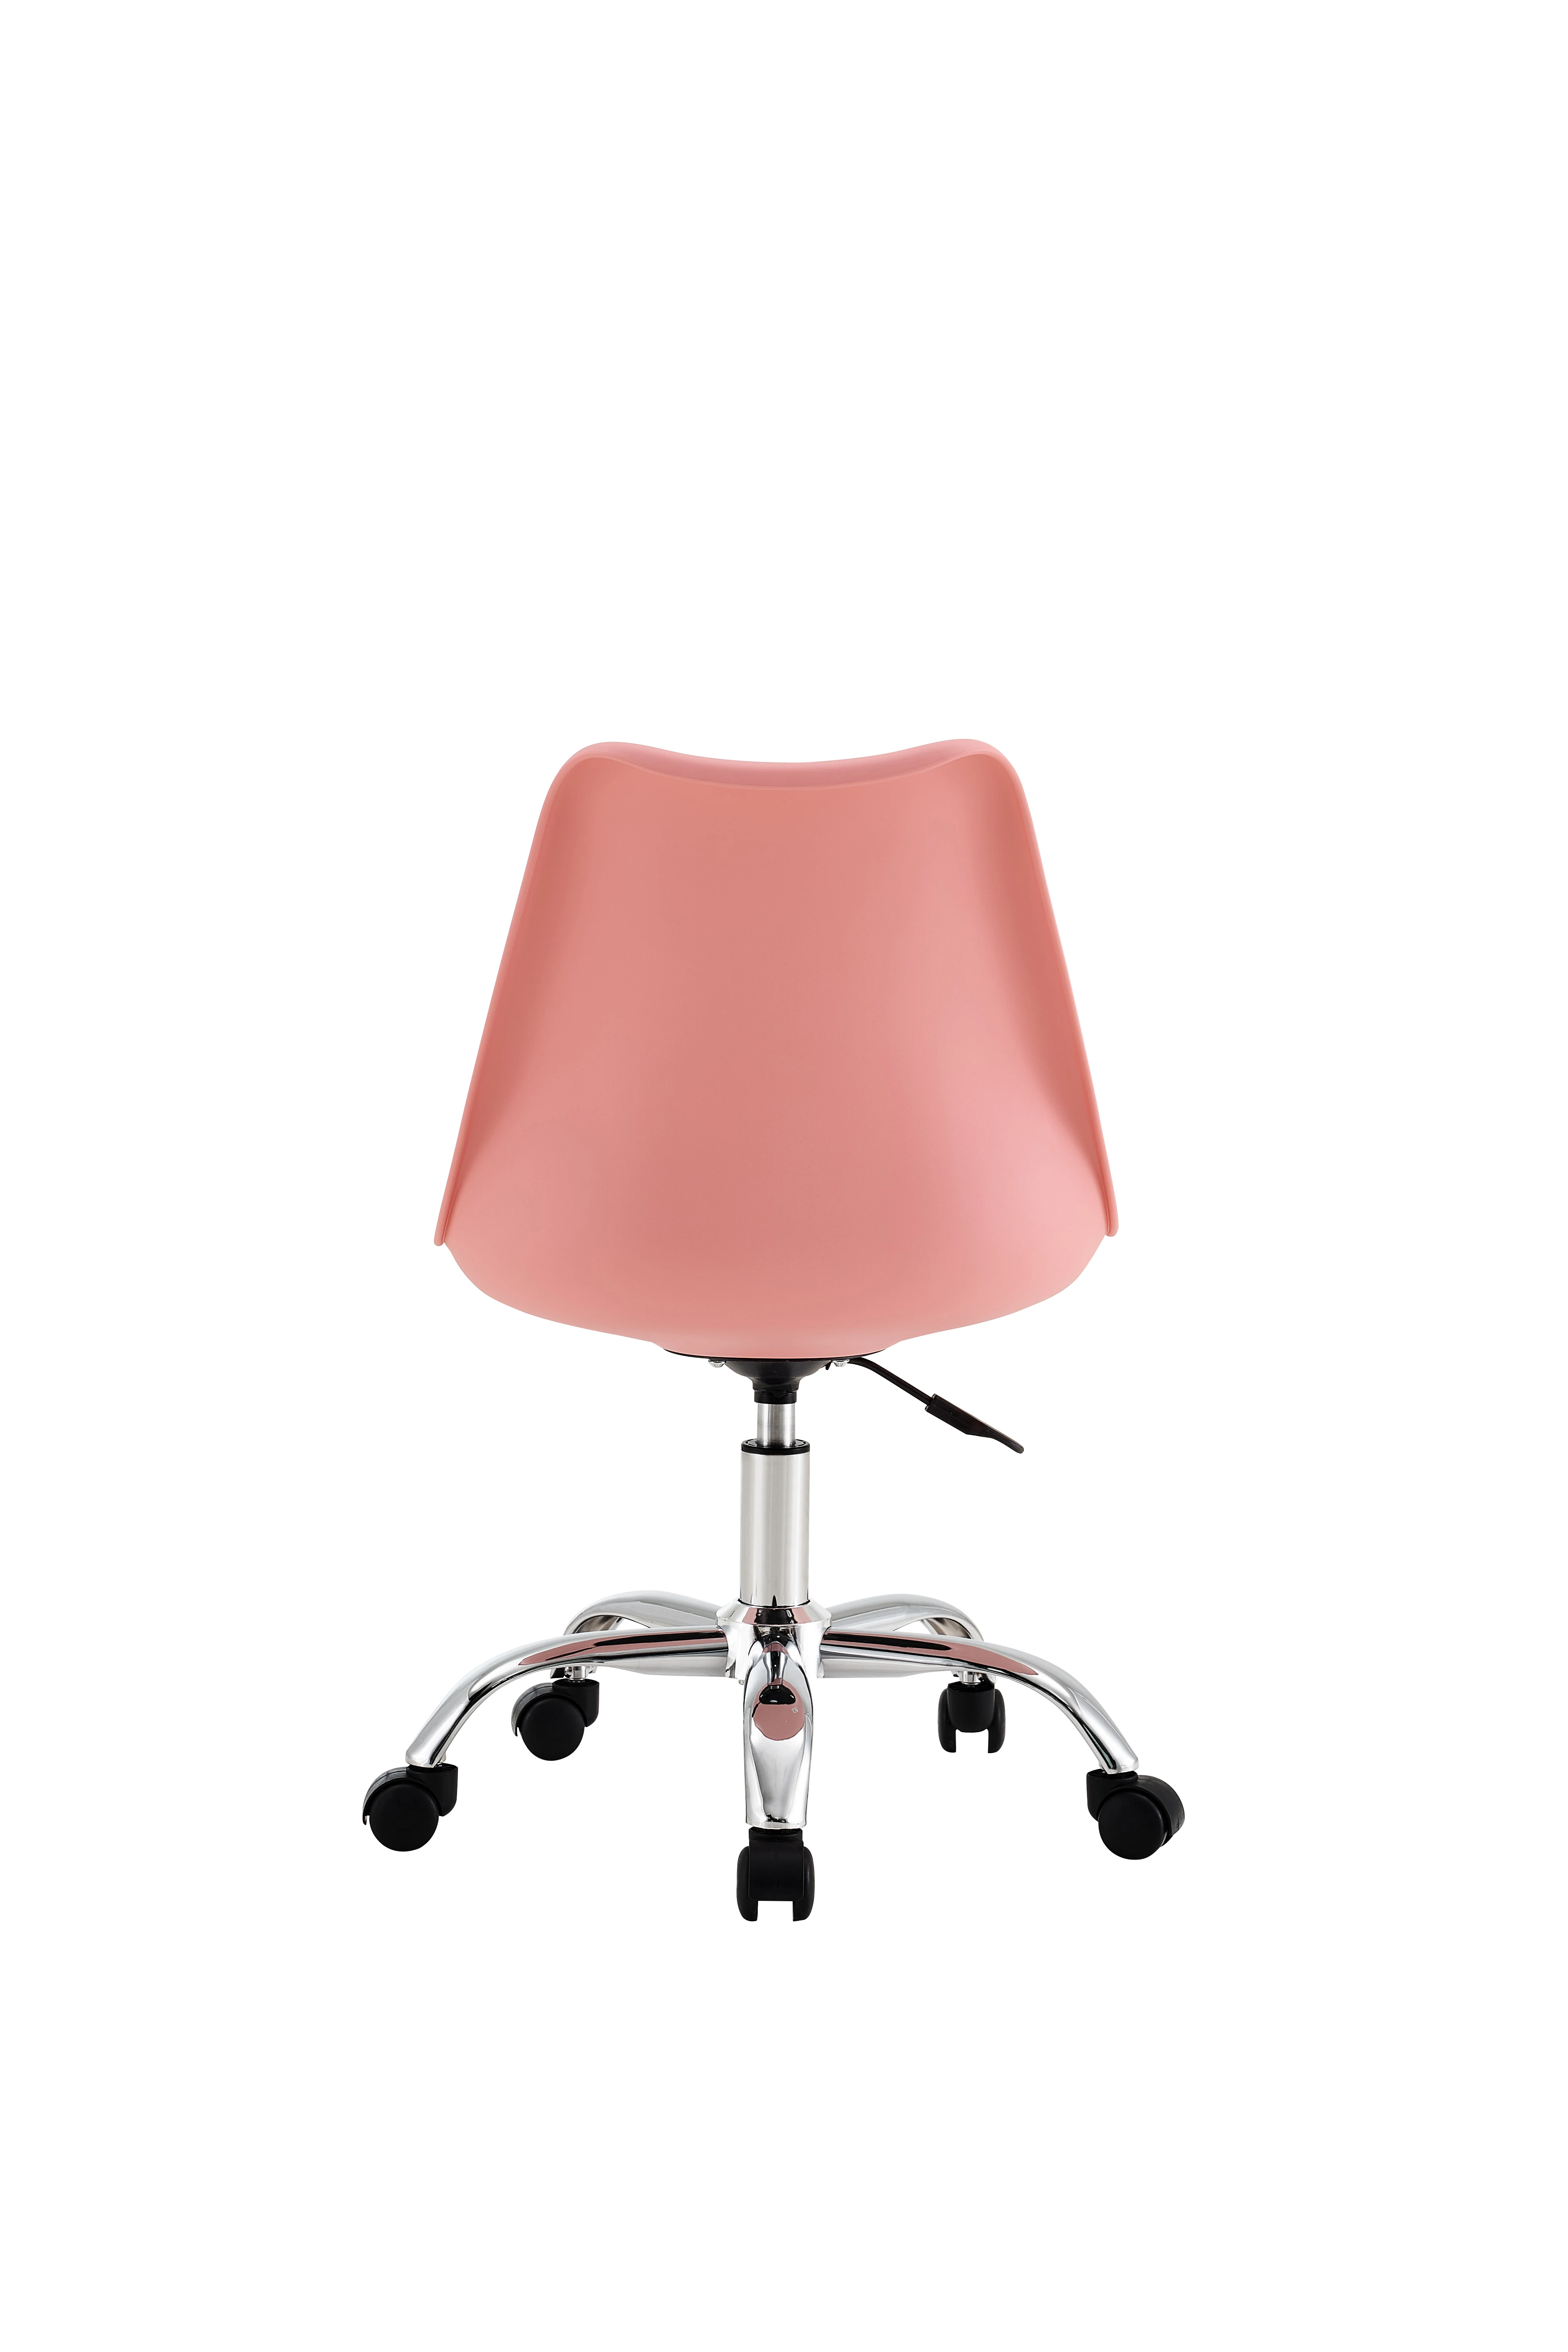 Commercial Furniture Swivel Office Visitor Chair Parts Pink Ergonomic Swivel Office Chair Computer Desk Chair